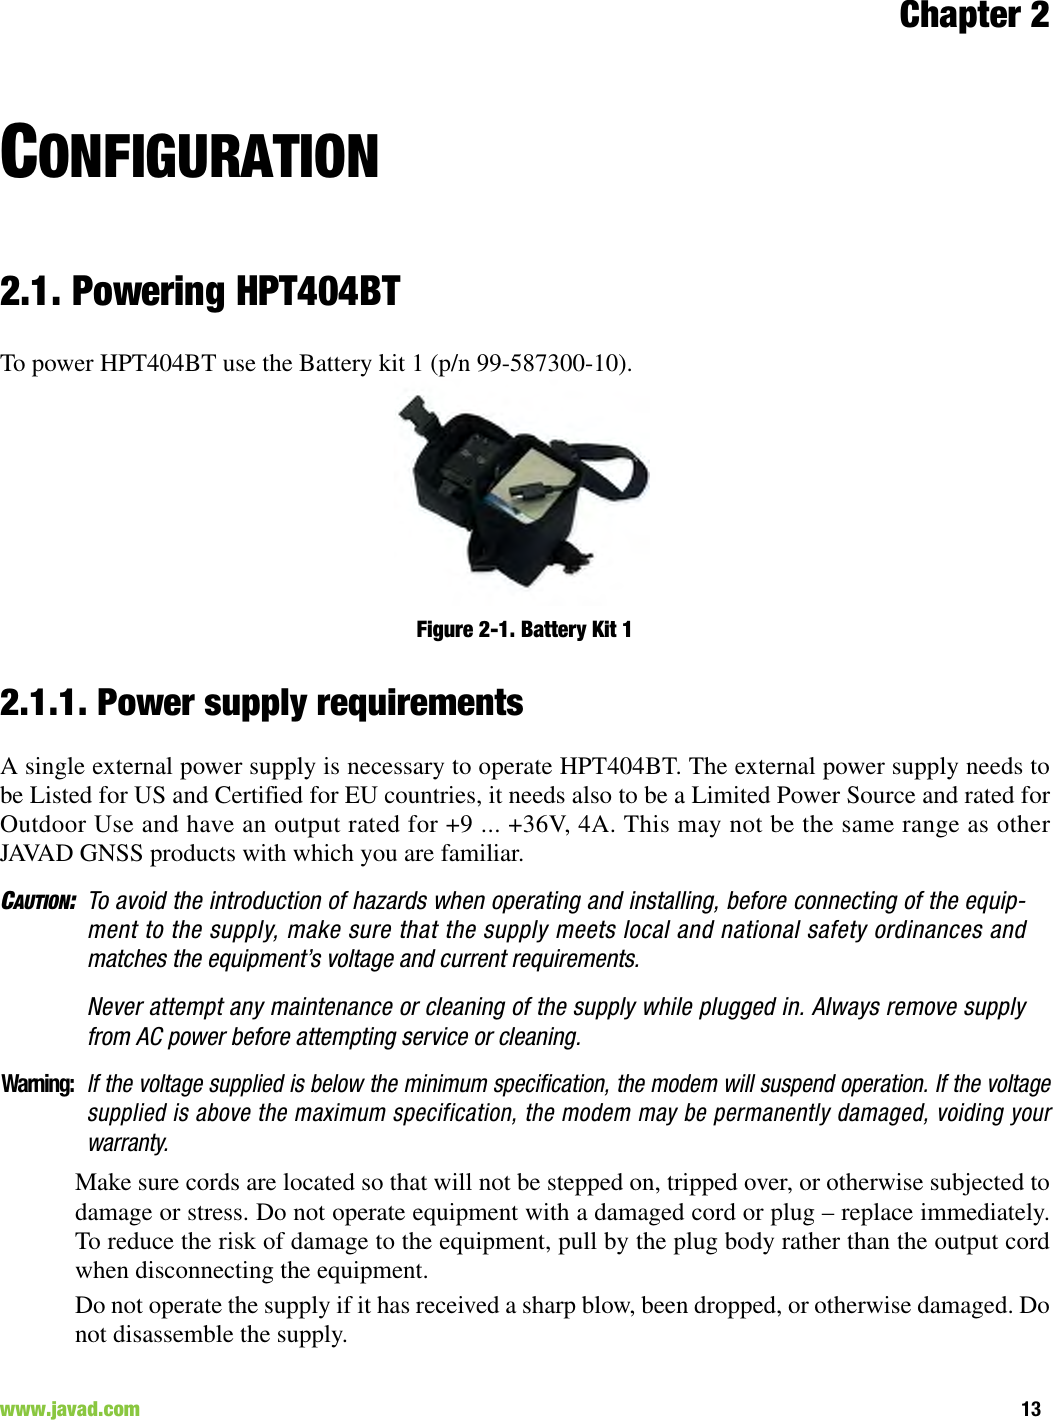 Chapter 213www.javad.com                                                                                                                                                        CONFIGURATION2.1. Powering HPT404BTTo power HPT404BT use the Battery kit 1 (p/n 99-587300-10).Figure 2-1. Battery Kit 12.1.1. Power supply requirementsA single external power supply is necessary to operate HPT404BT. The external power supply needs tobe Listed for US and Certified for EU countries, it needs also to be a Limited Power Source and rated forOutdoor Use and have an output rated for +9 ... +36V, 4A. This may not be the same range as otherJAVAD GNSS products with which you are familiar.CAUTION:To avoid the introduction of hazards when operating and installing, before connecting of the equip-ment to the supply, make sure that the supply meets local and national safety ordinances andmatches the equipment’s voltage and current requirements.Never attempt any maintenance or cleaning of the supply while plugged in. Always remove supplyfrom AC power before attempting service or cleaning.Warning:If the voltage supplied is below the minimum specification, the modem will suspend operation. If the voltagesupplied is above the maximum specification, the modem may be permanently damaged, voiding yourwarranty.Make sure cords are located so that will not be stepped on, tripped over, or otherwise subjected todamage or stress. Do not operate equipment with a damaged cord or plug – replace immediately.To reduce the risk of damage to the equipment, pull by the plug body rather than the output cordwhen disconnecting the equipment.Do not operate the supply if it has received a sharp blow, been dropped, or otherwise damaged. Donot disassemble the supply. 